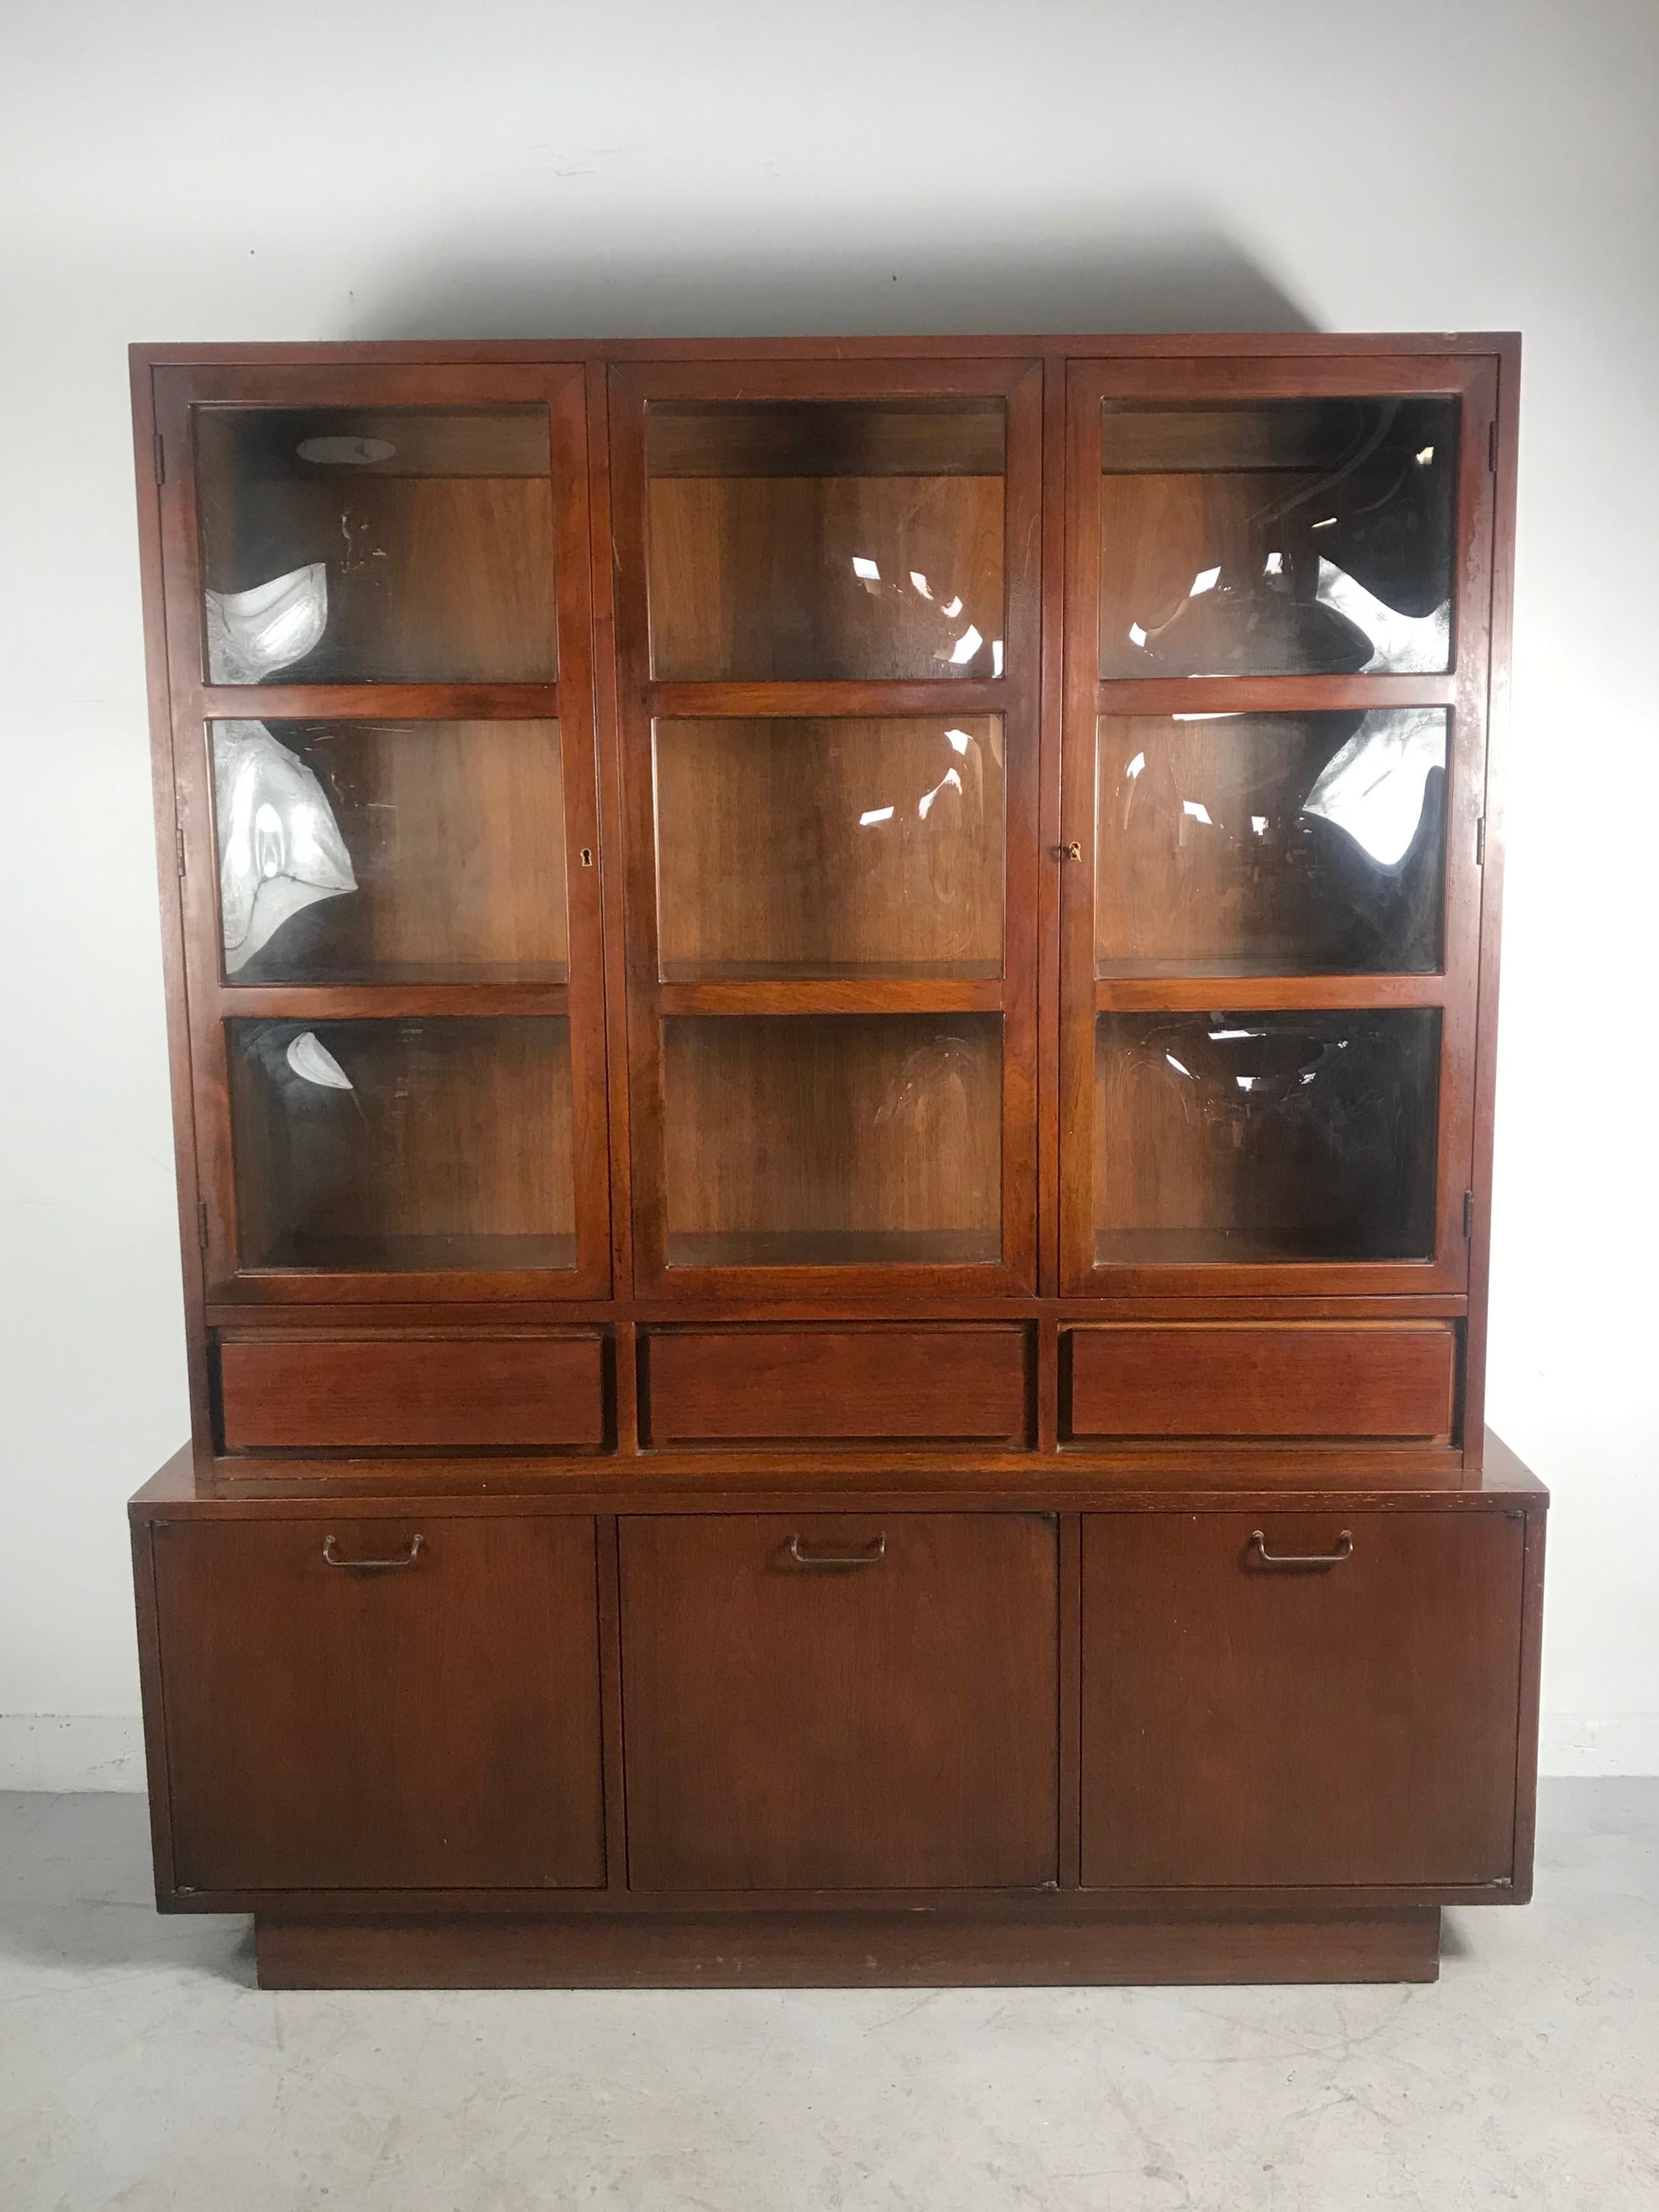 Seldom seen modernist server with stunning Bubble glass top designed by Merton Gershun for American of Martinsville. Featuring three generous storage to bottom, three drawers, one being silverware drawer and two door top display locking cabinet with